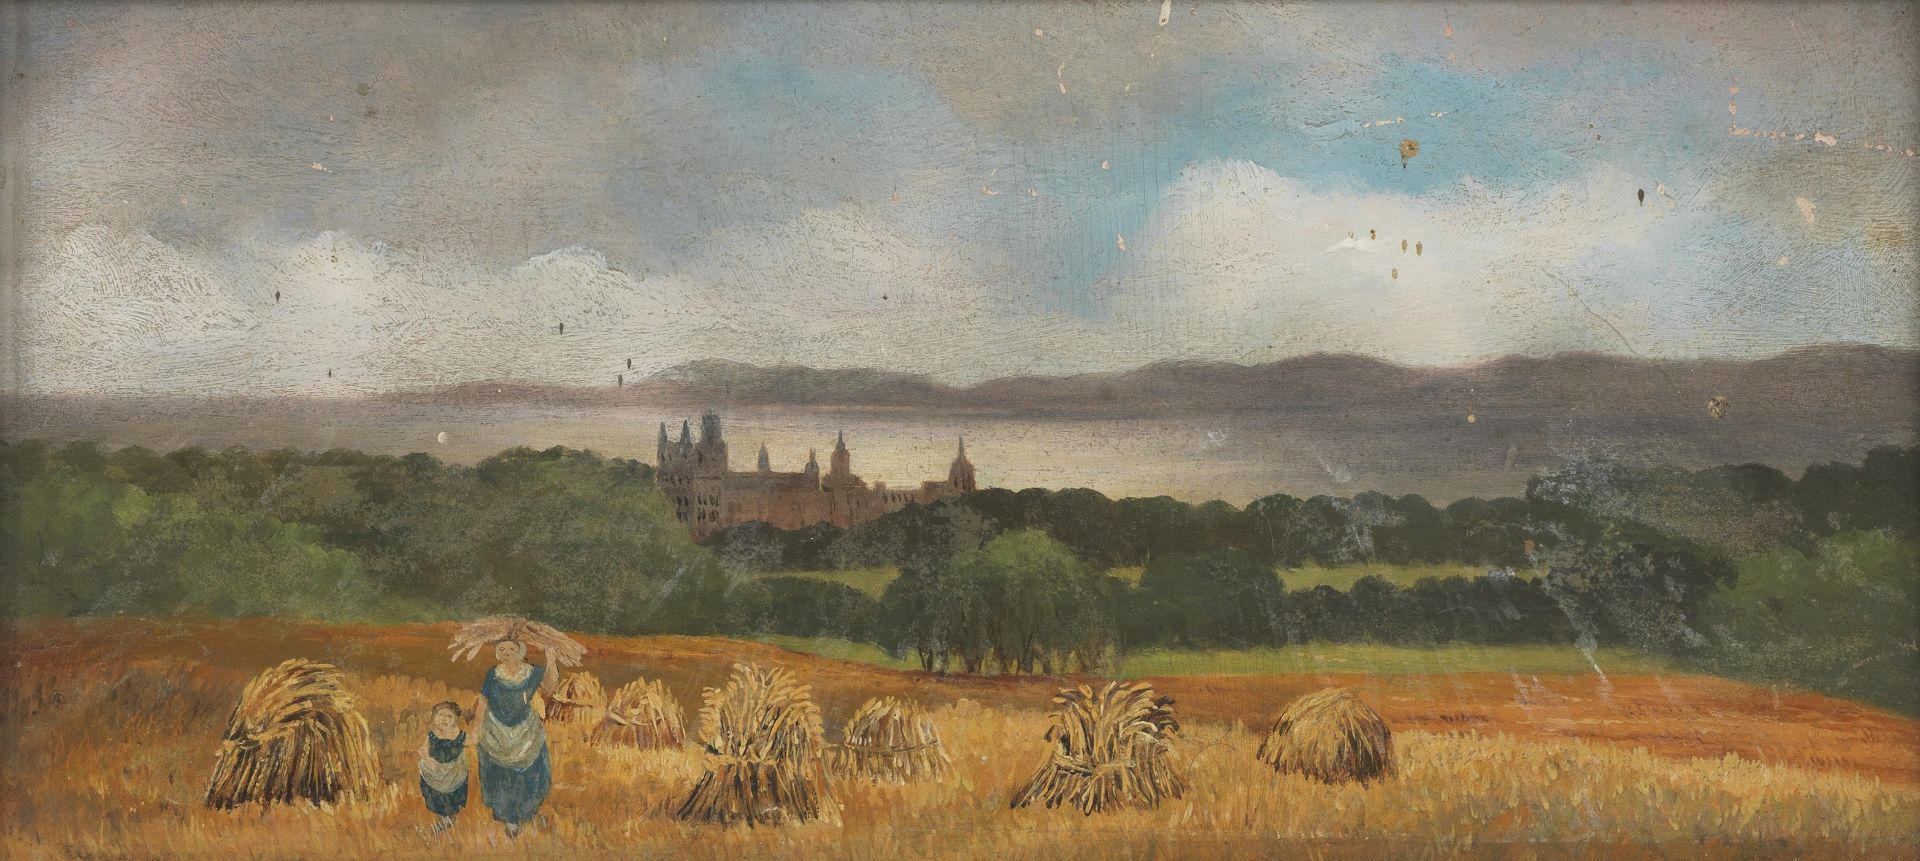 Scottish School (Early 19th Century) View of Dunrobin, with harvesters in foreground